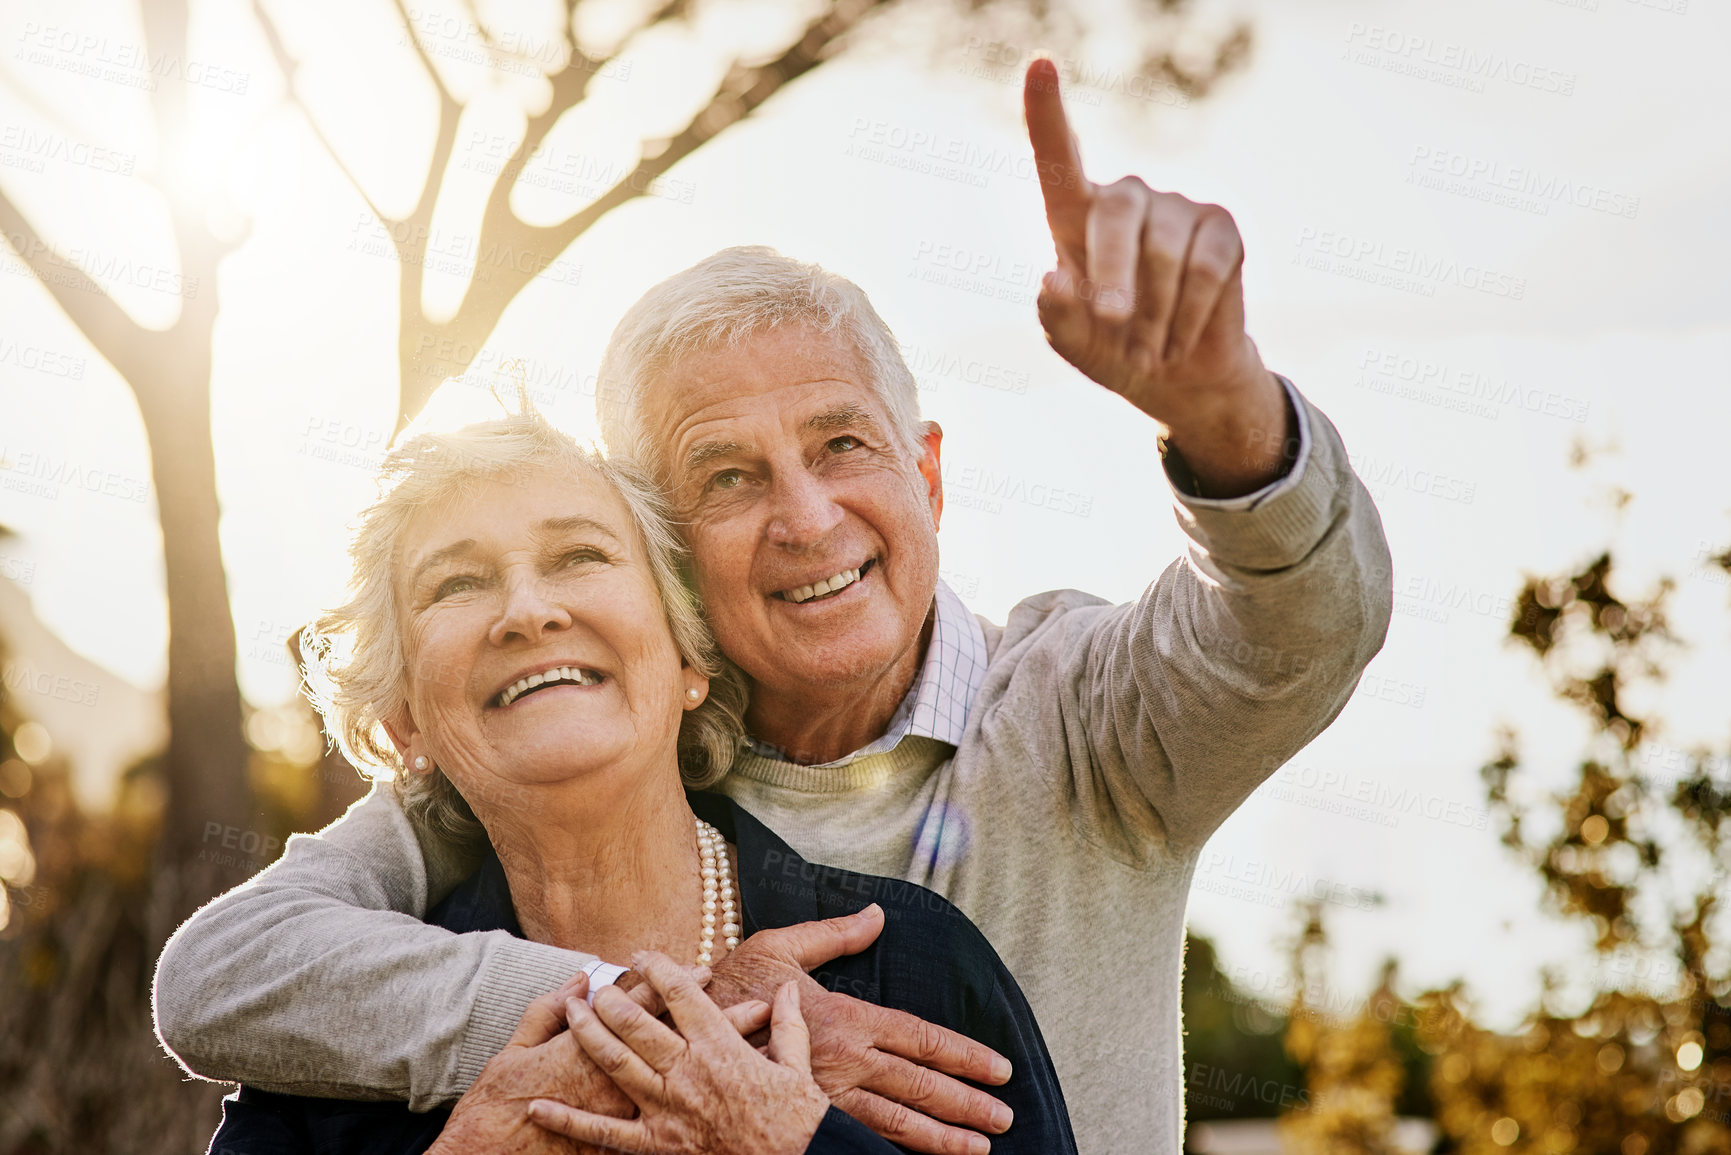 Buy stock photo Shot of a happy senior man pointing something out to his wife outdoors